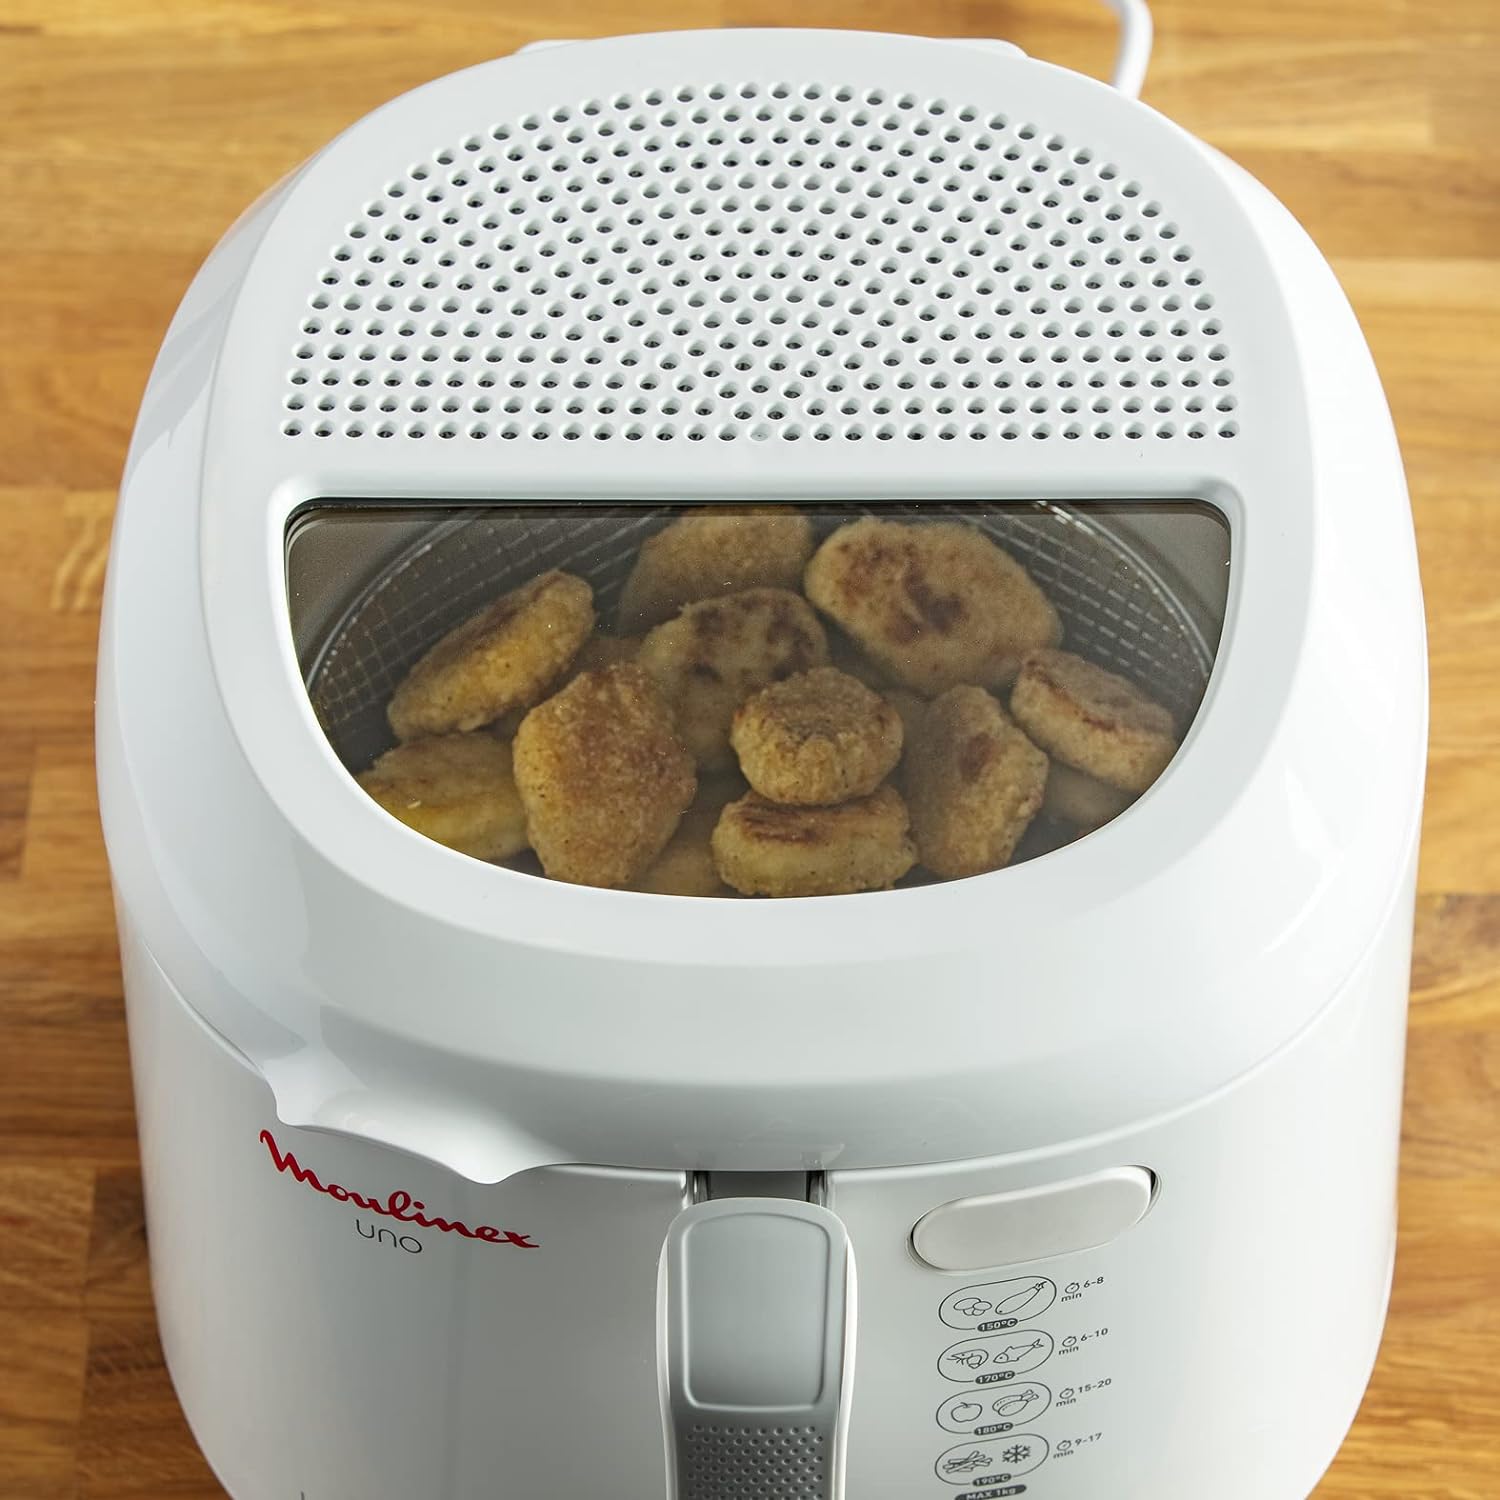 Moulinex Uno Electric Deep Fryer,1 kg Capacity, Serves 4, Compact Fryer, Easy Storage, Draining Position for Less Oil, Viewing Window, AF203127